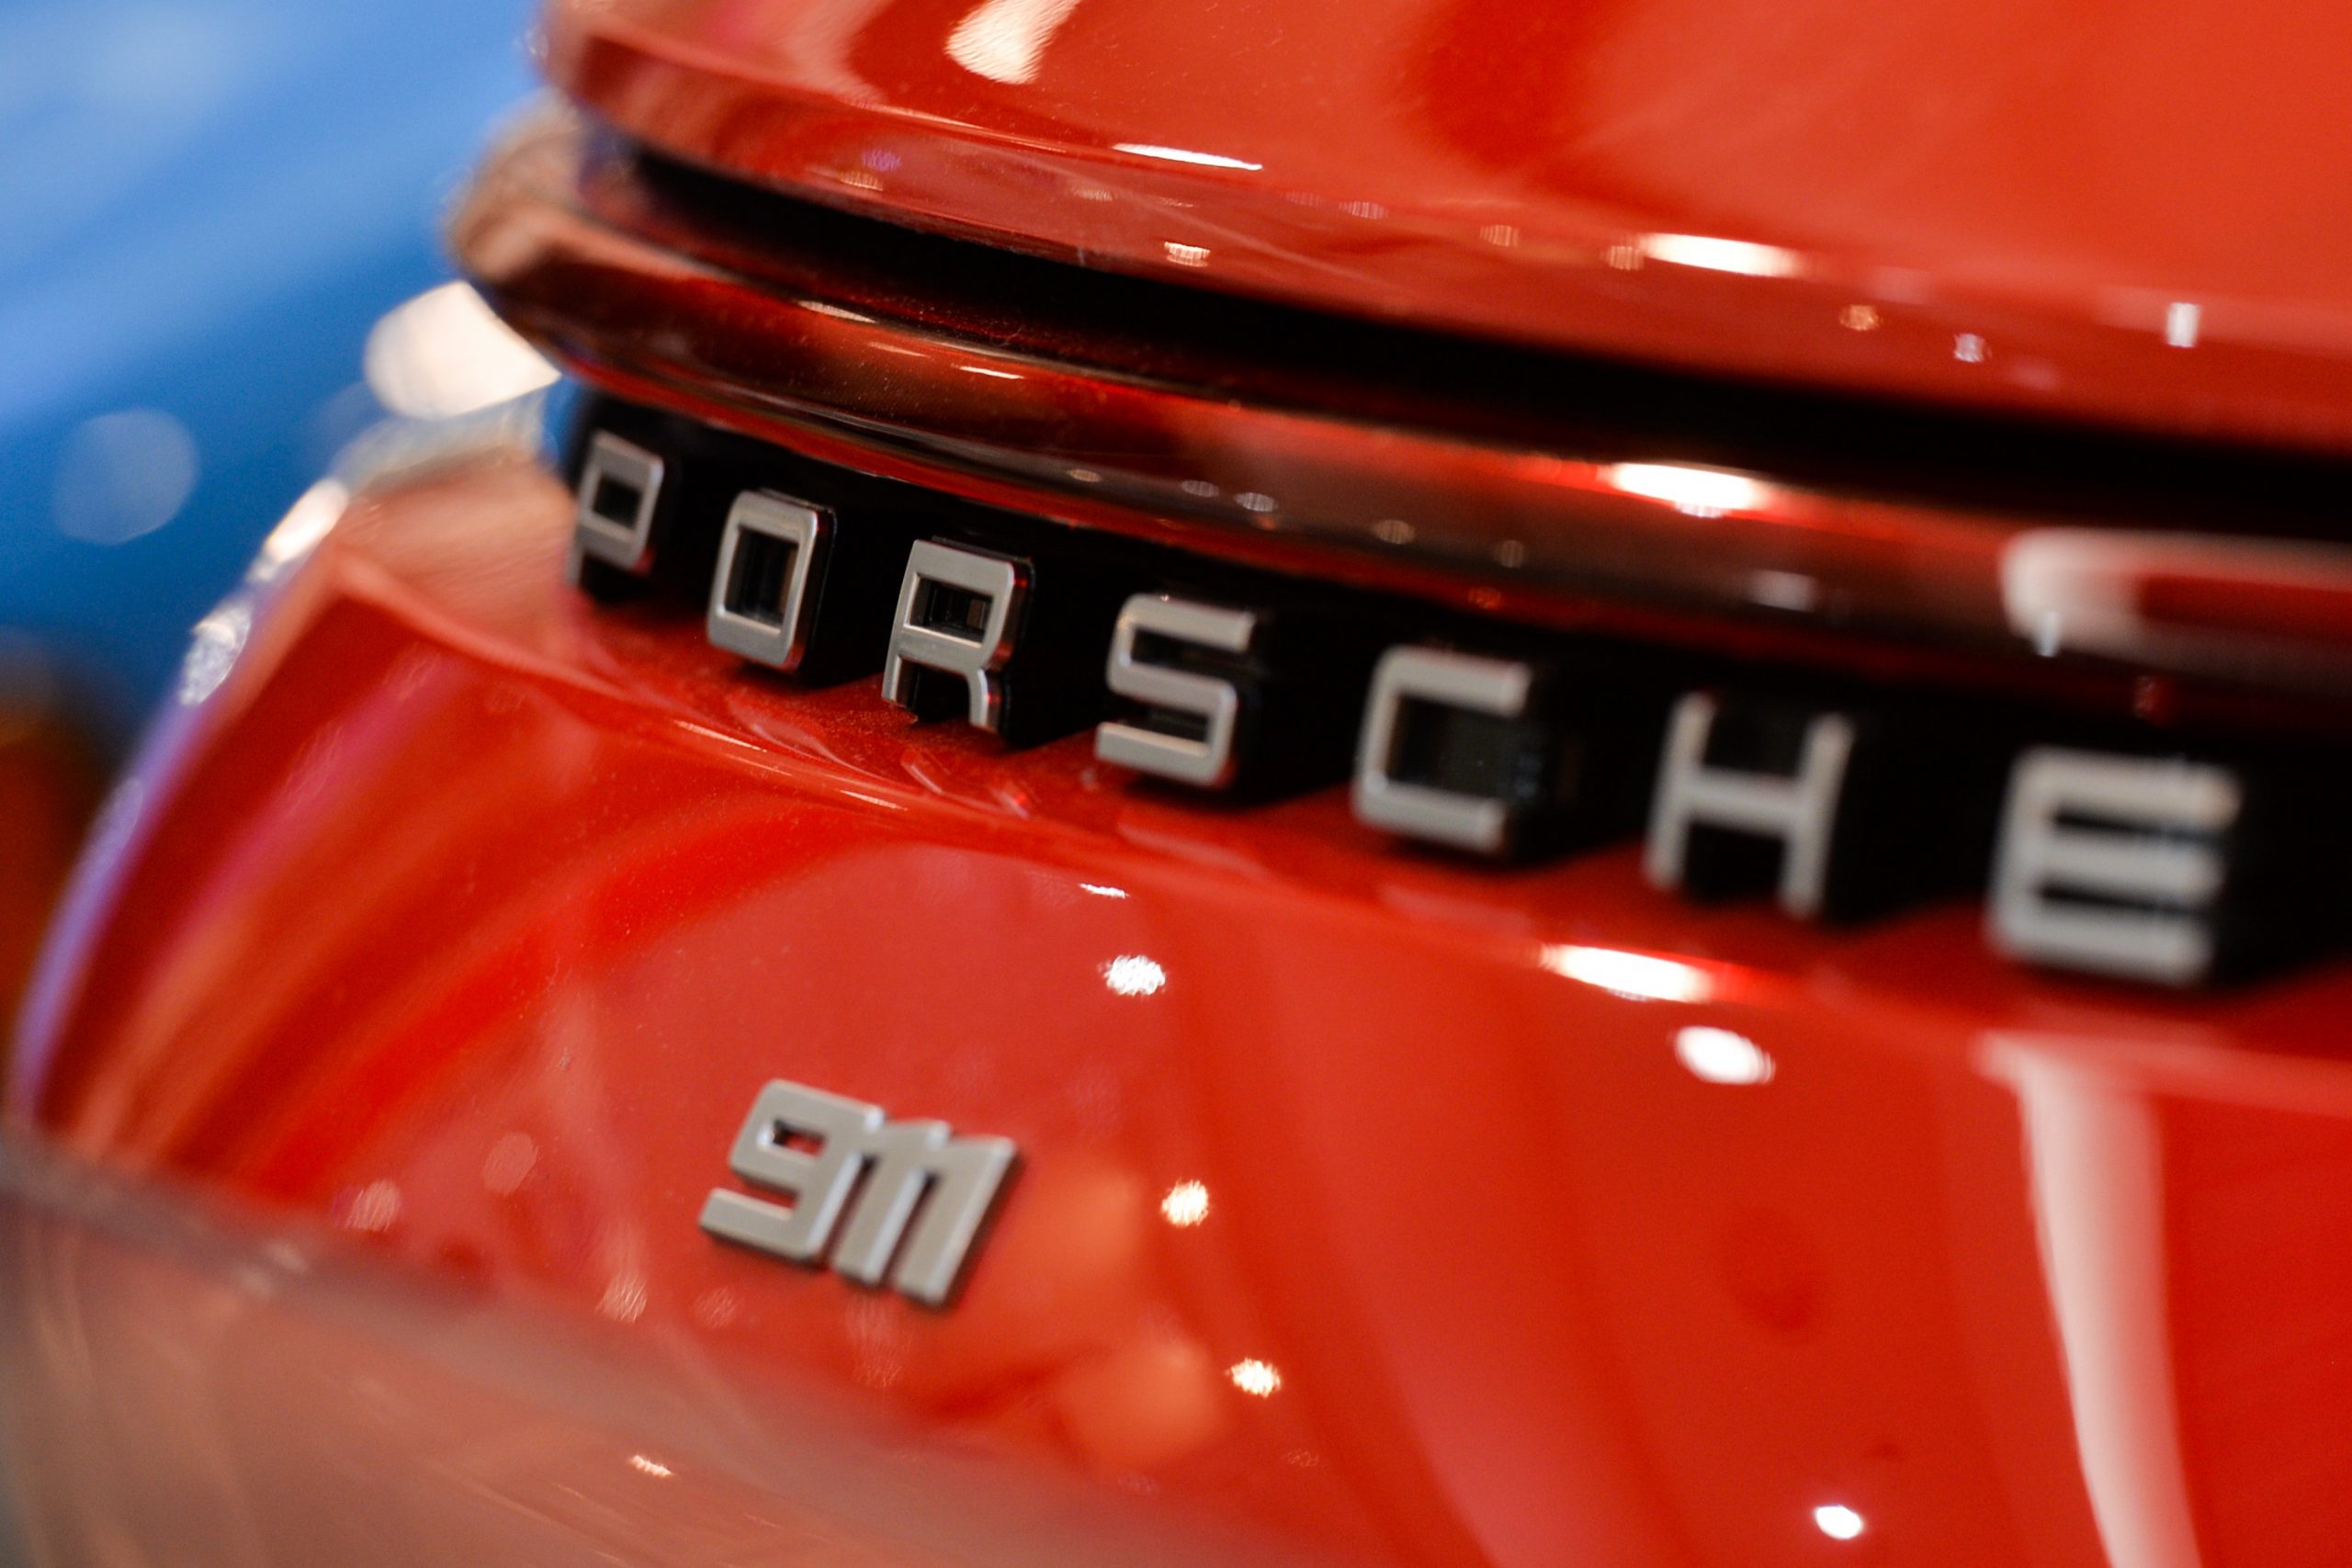 The rear 911 badge on a red Porsche